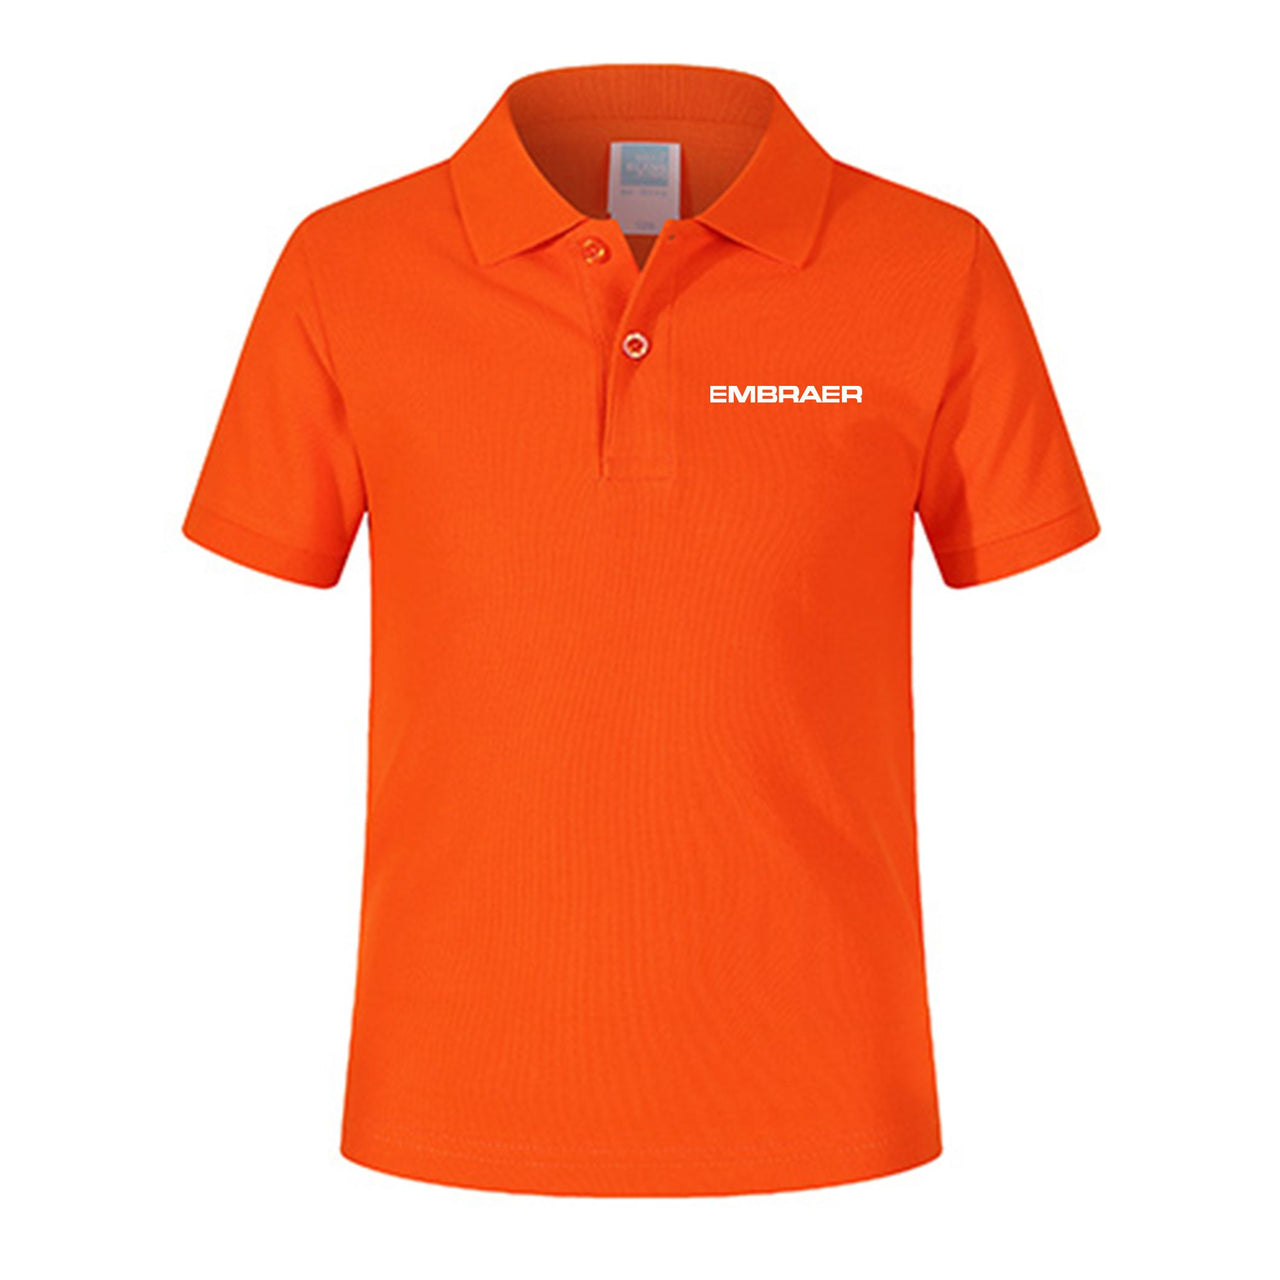 Embraer & Text Designed Children Polo T-Shirts